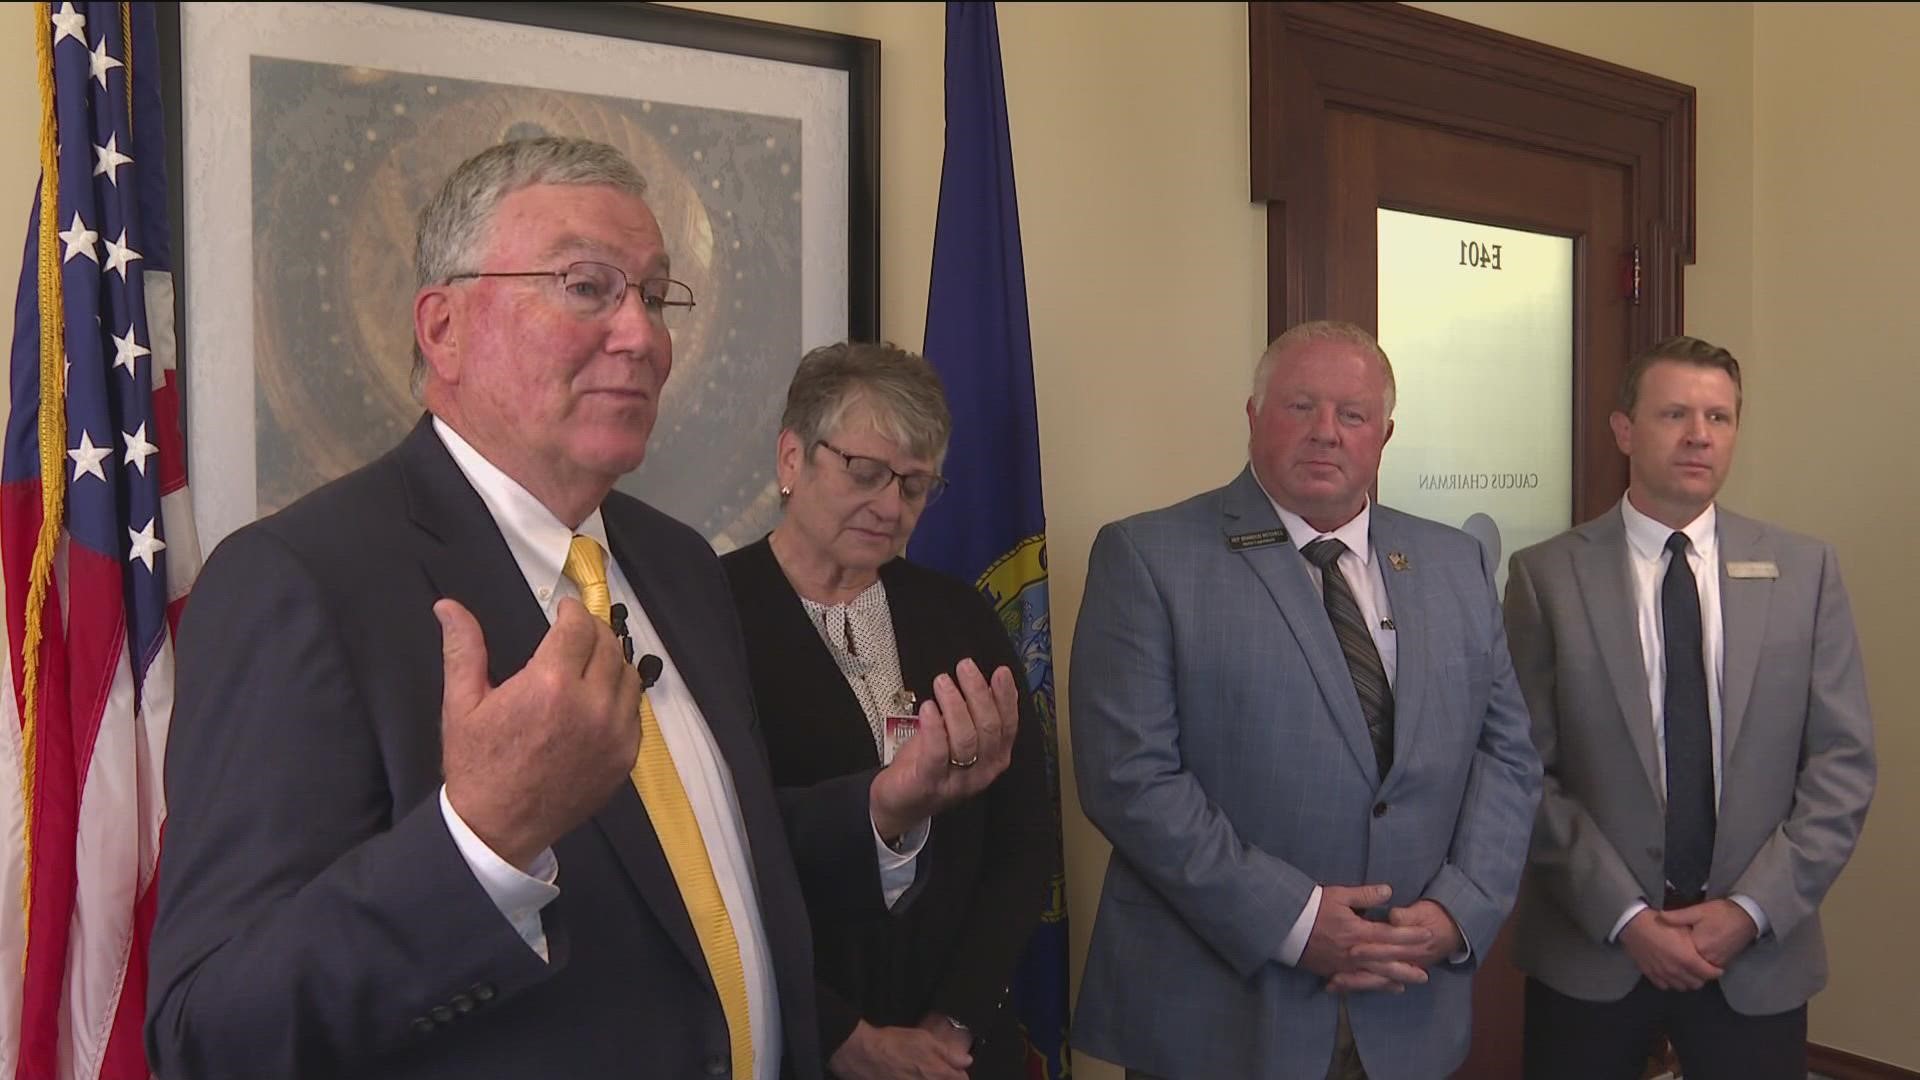 Though some tempers flared, and the governor made a last-minute change in the bill, Gov. Brad Little’s tax cuts and education funding bill was signed into law.